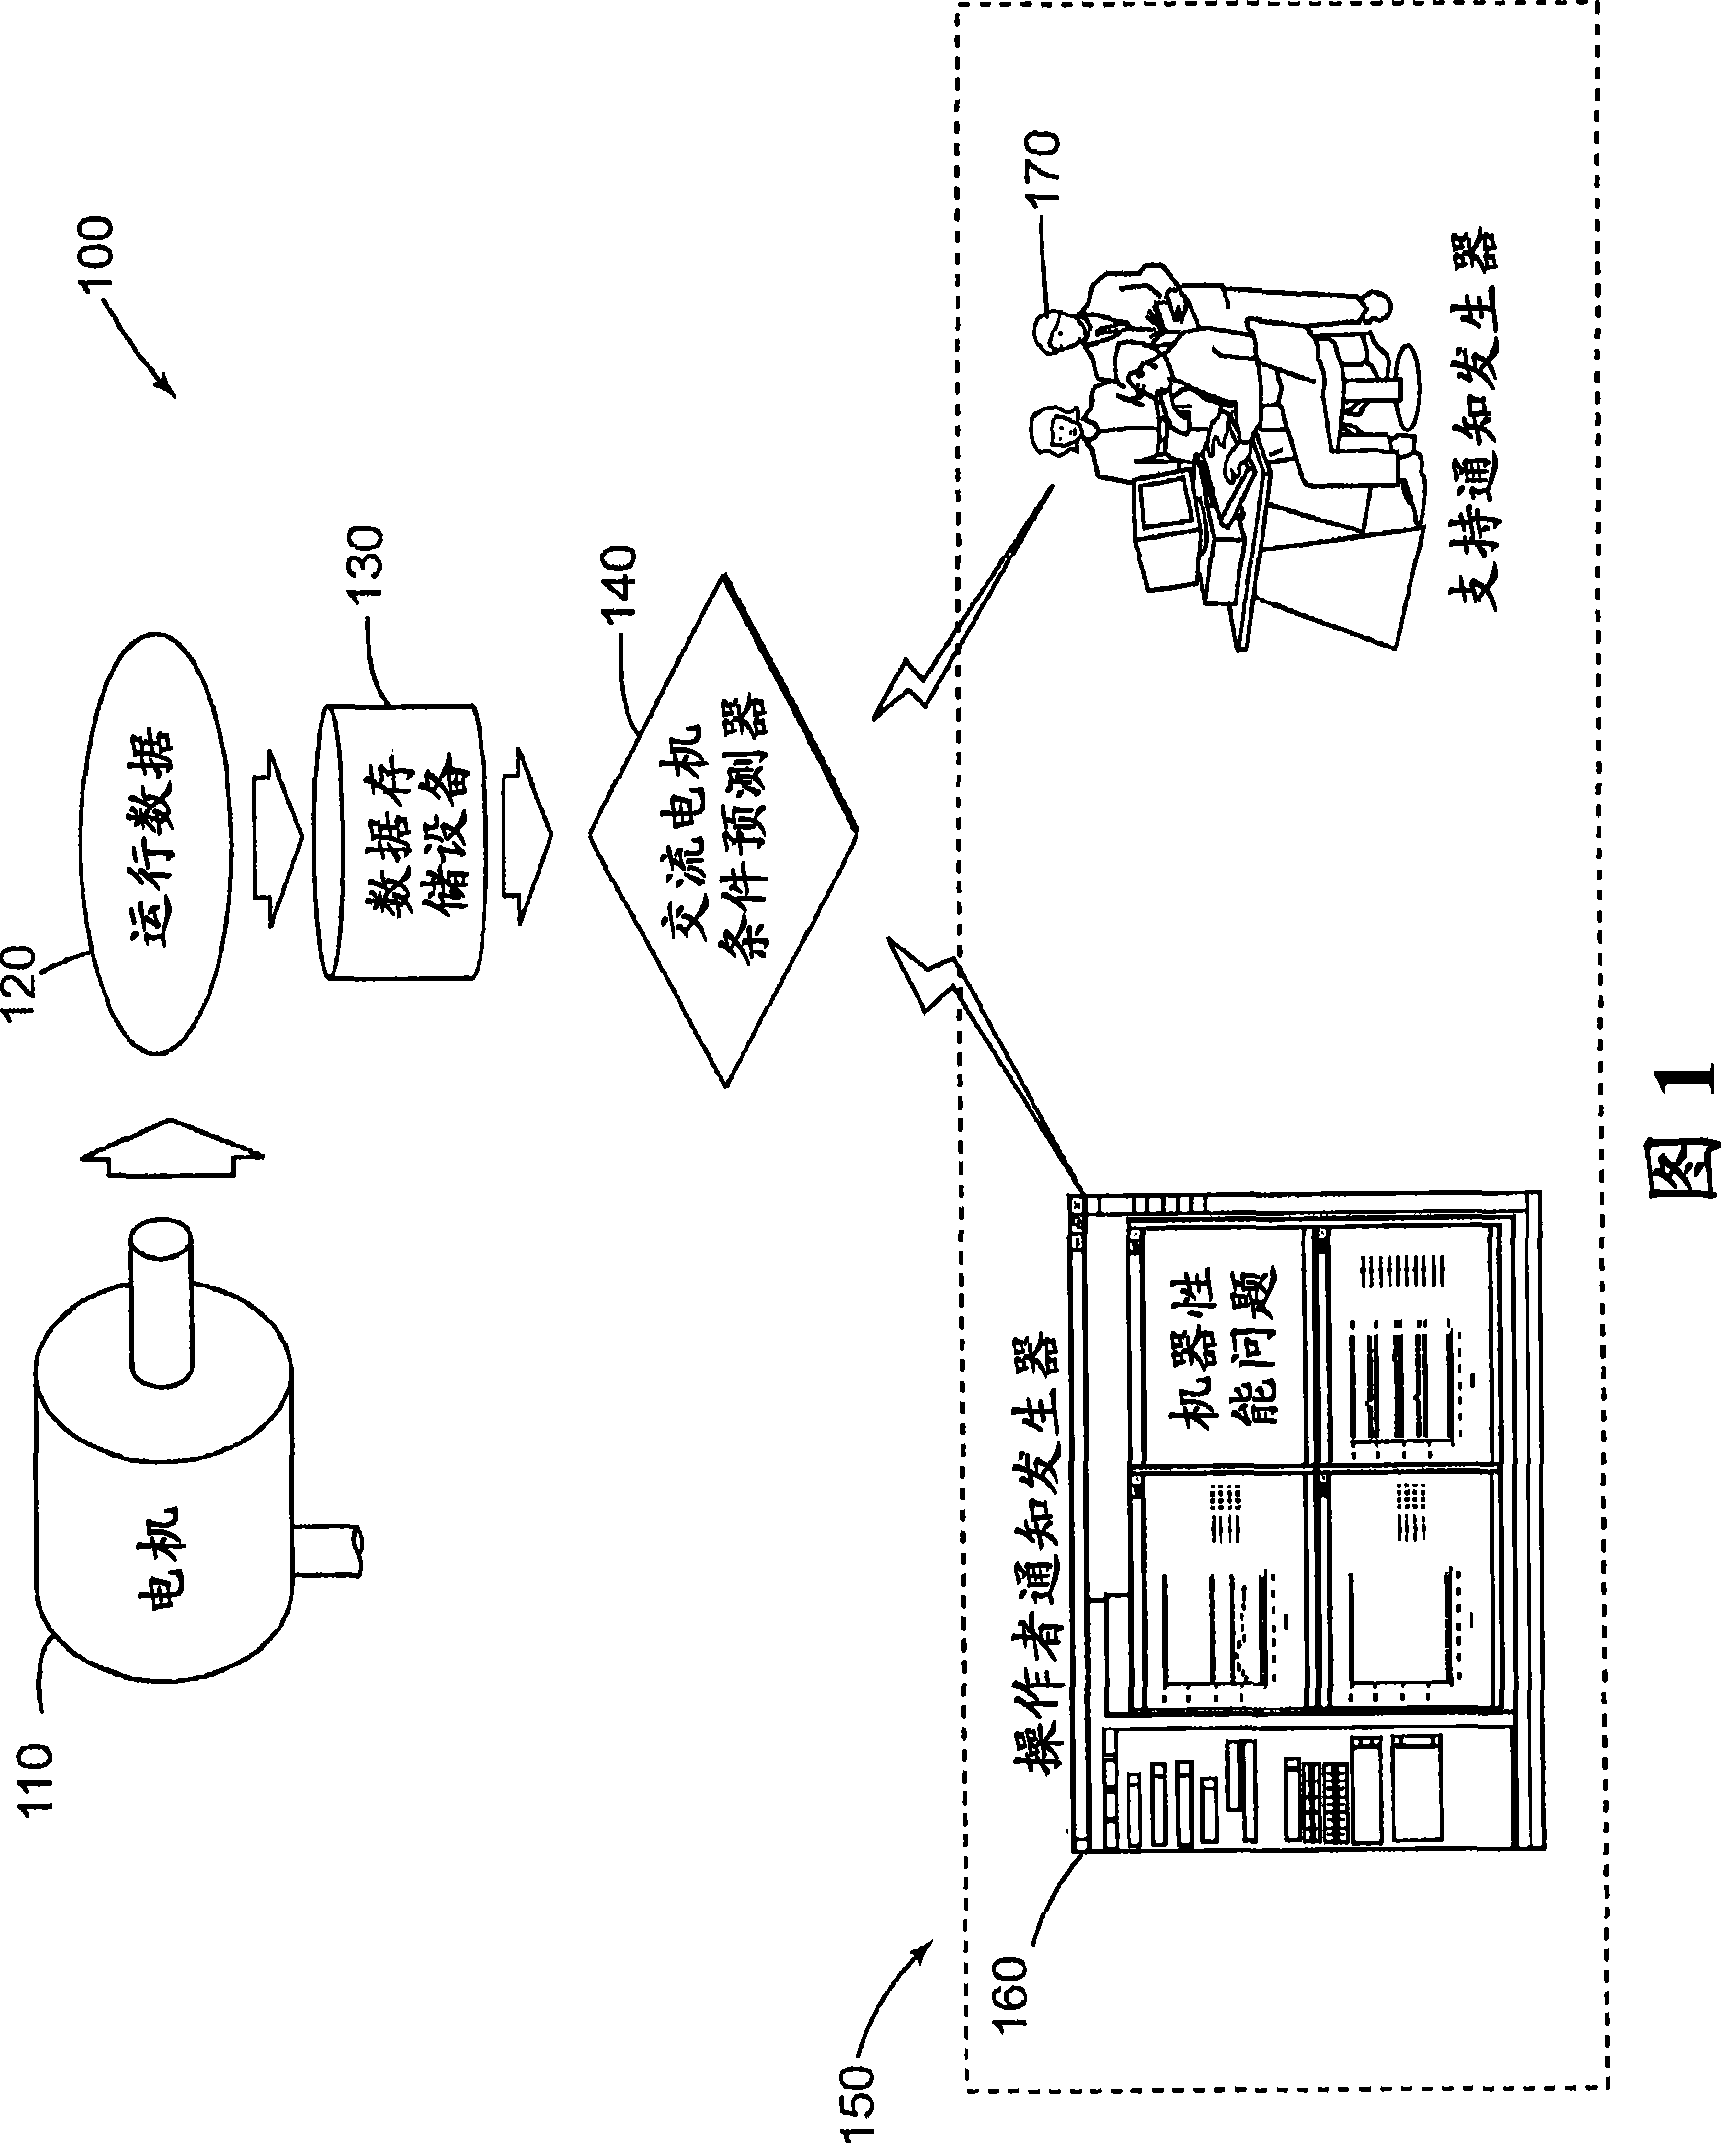 Method and system for remotely predicting the remaining life of an AC motor system